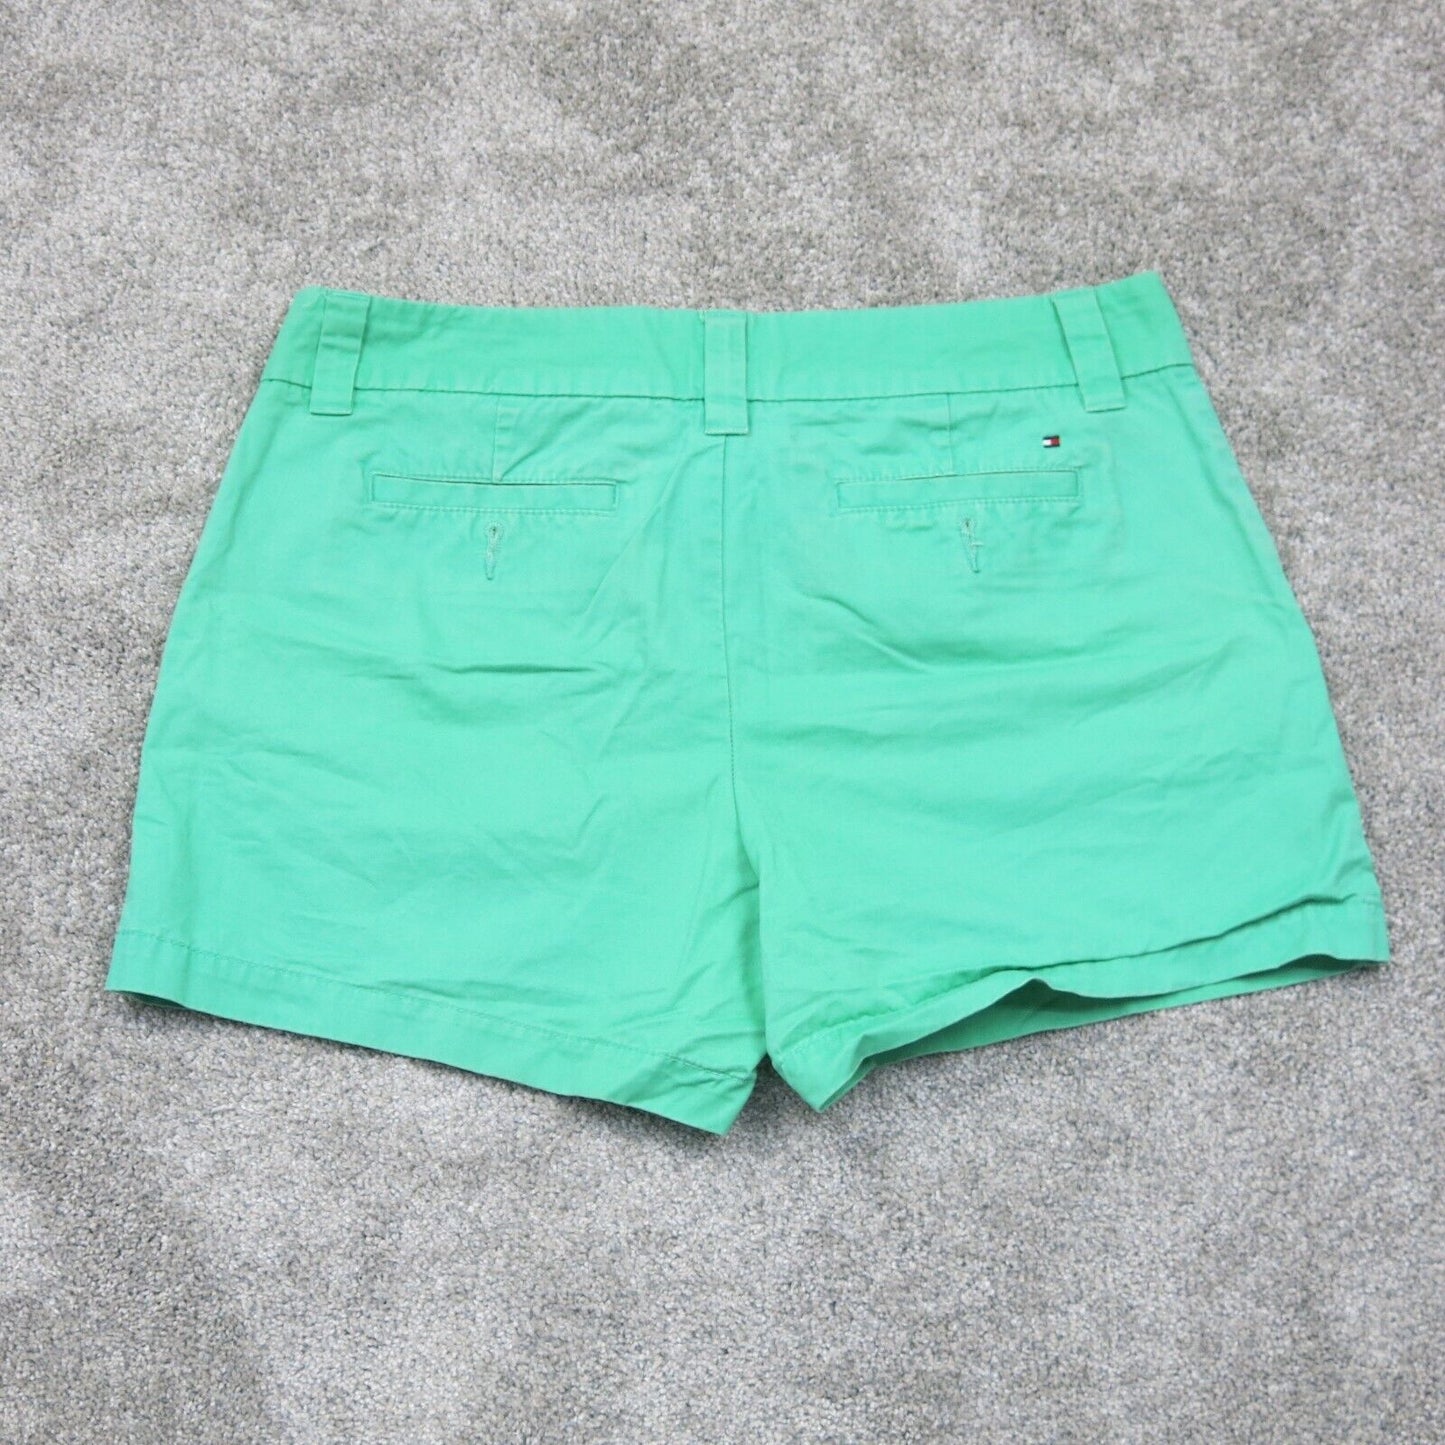 Tommy Hilfiger Women Chino Shorts Mid Rise Flat Front Pockets Mint Green Size 12